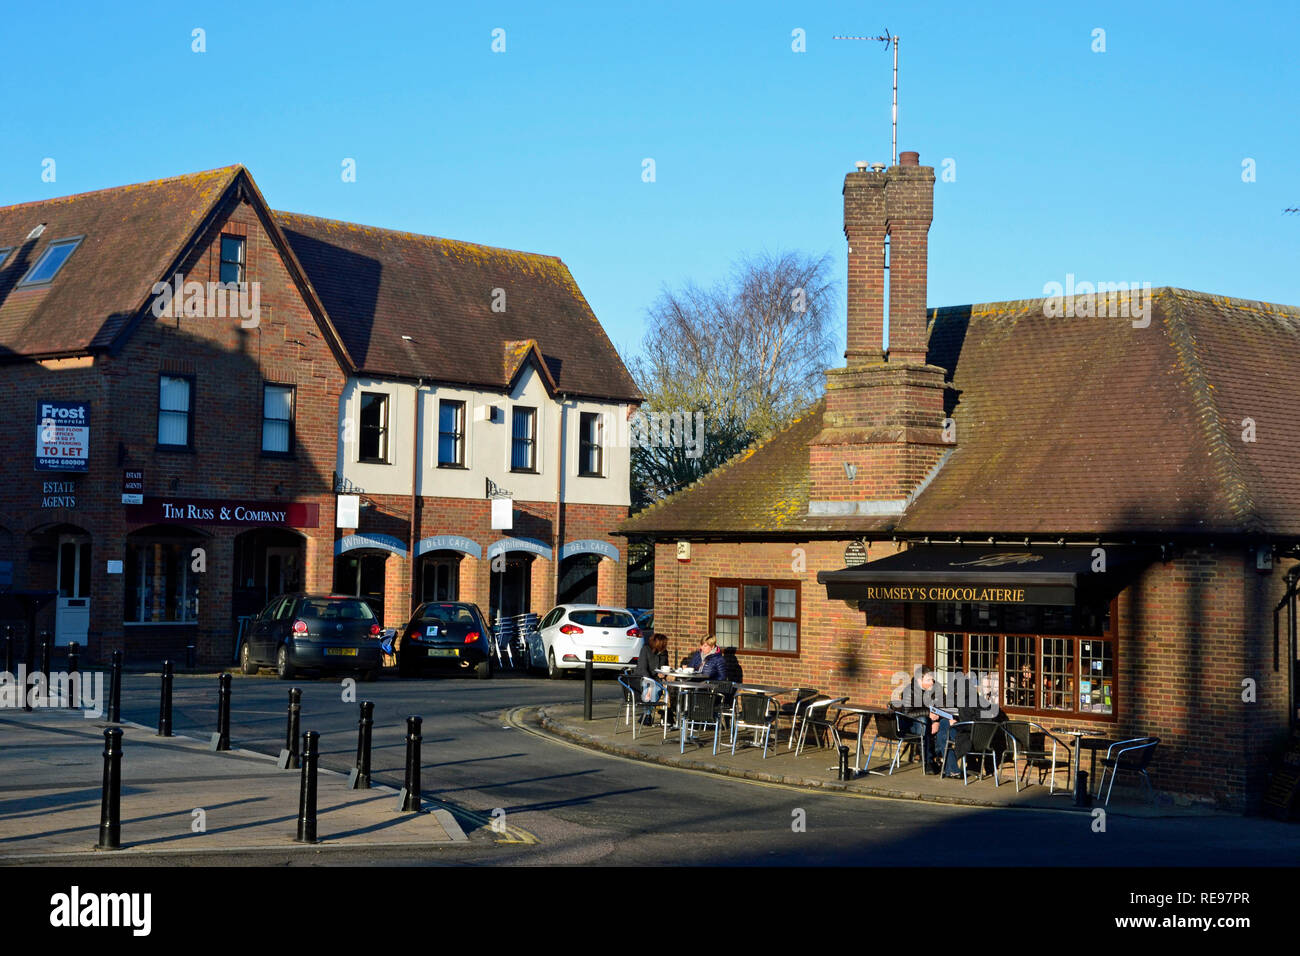 Rumsey's Chocolaterie in Wendover, Buckinghamshire, UK. Chilterns landscape. Stock Photo